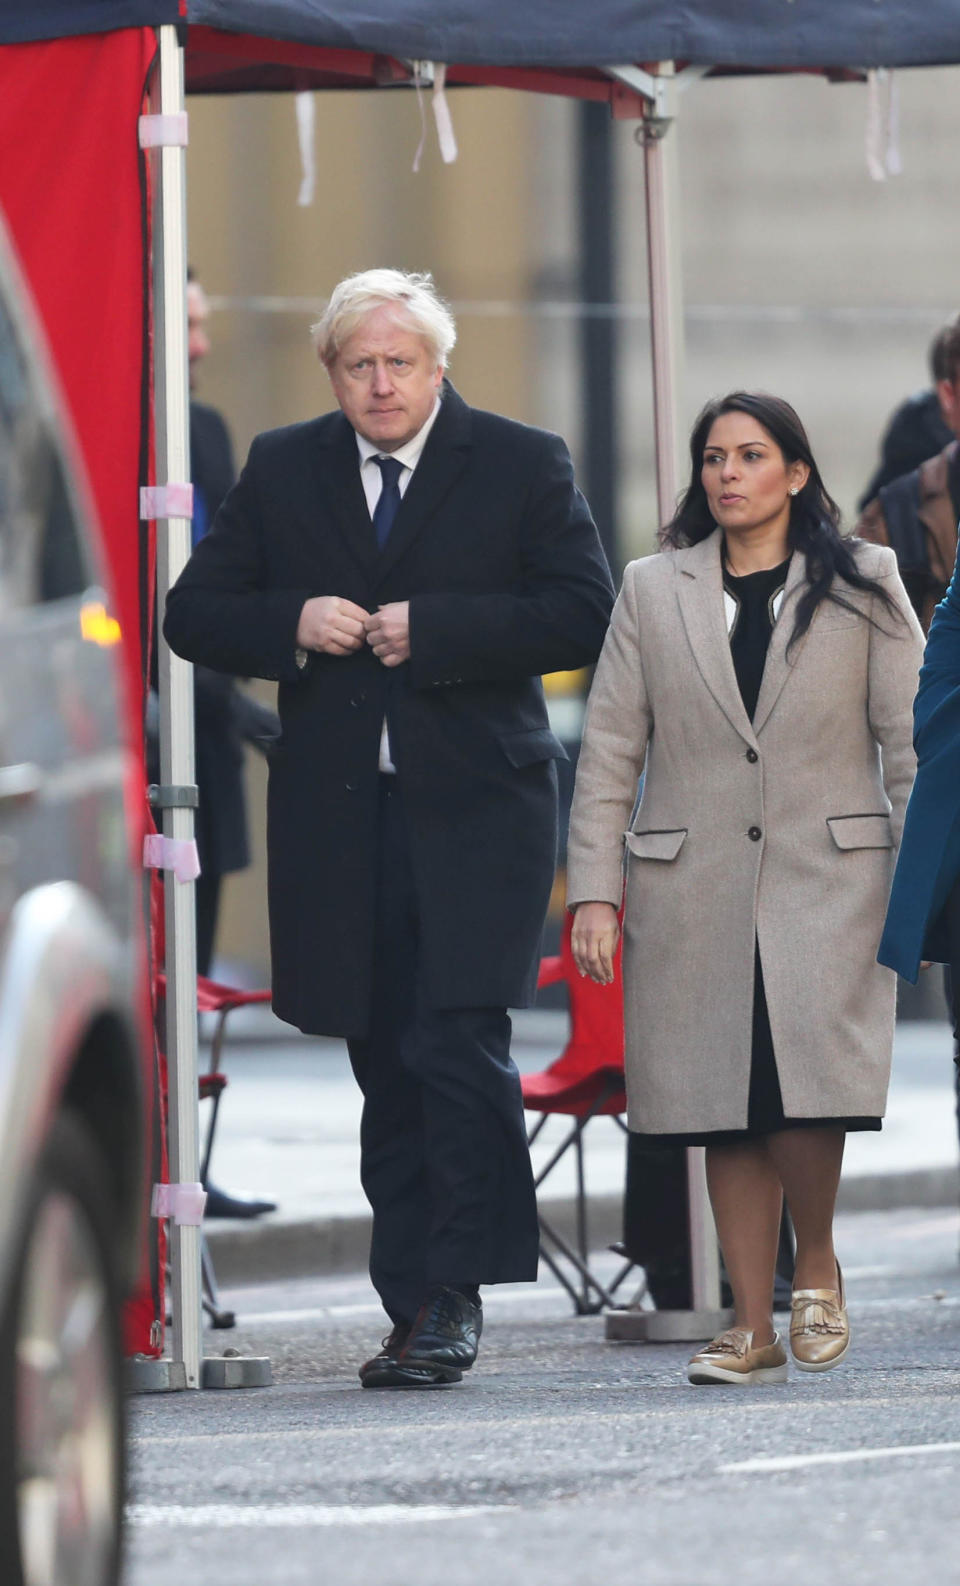 Prime Minister Boris Johnson (left) and Home Secretary, Priti Patel (right) attend London Bridge in central London after a terrorist wearing a fake suicide vest who went on a knife rampage killing two people, was shot dead by police.